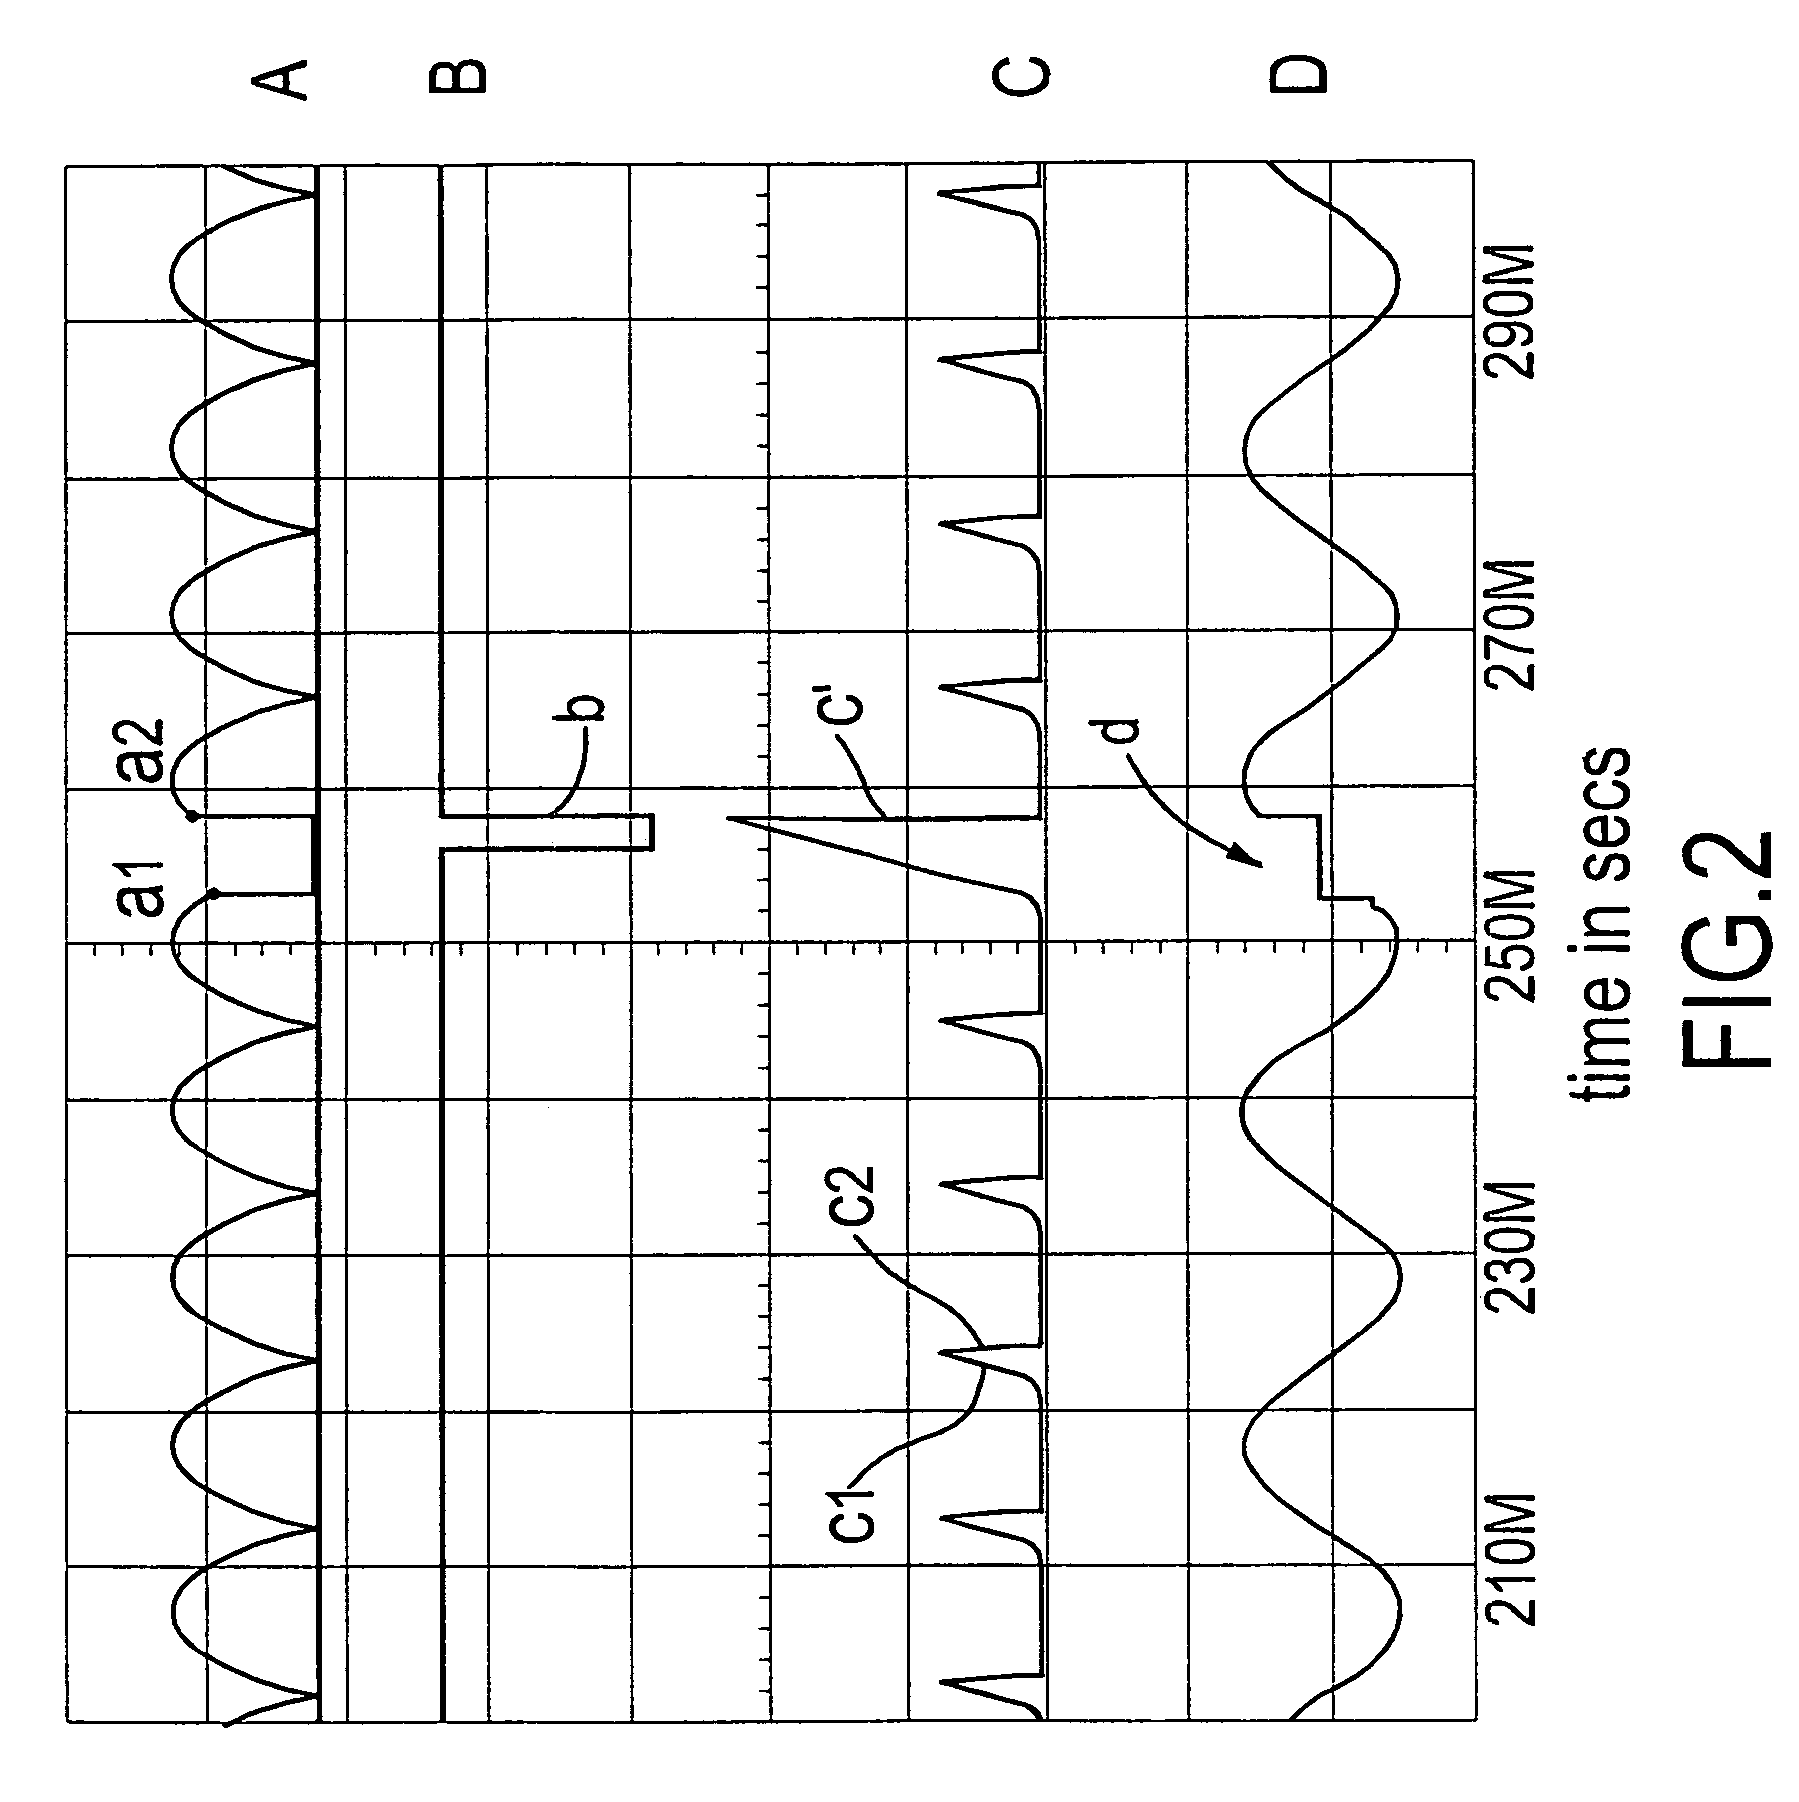 AC/DC converter capable of actively restraining an inrush current